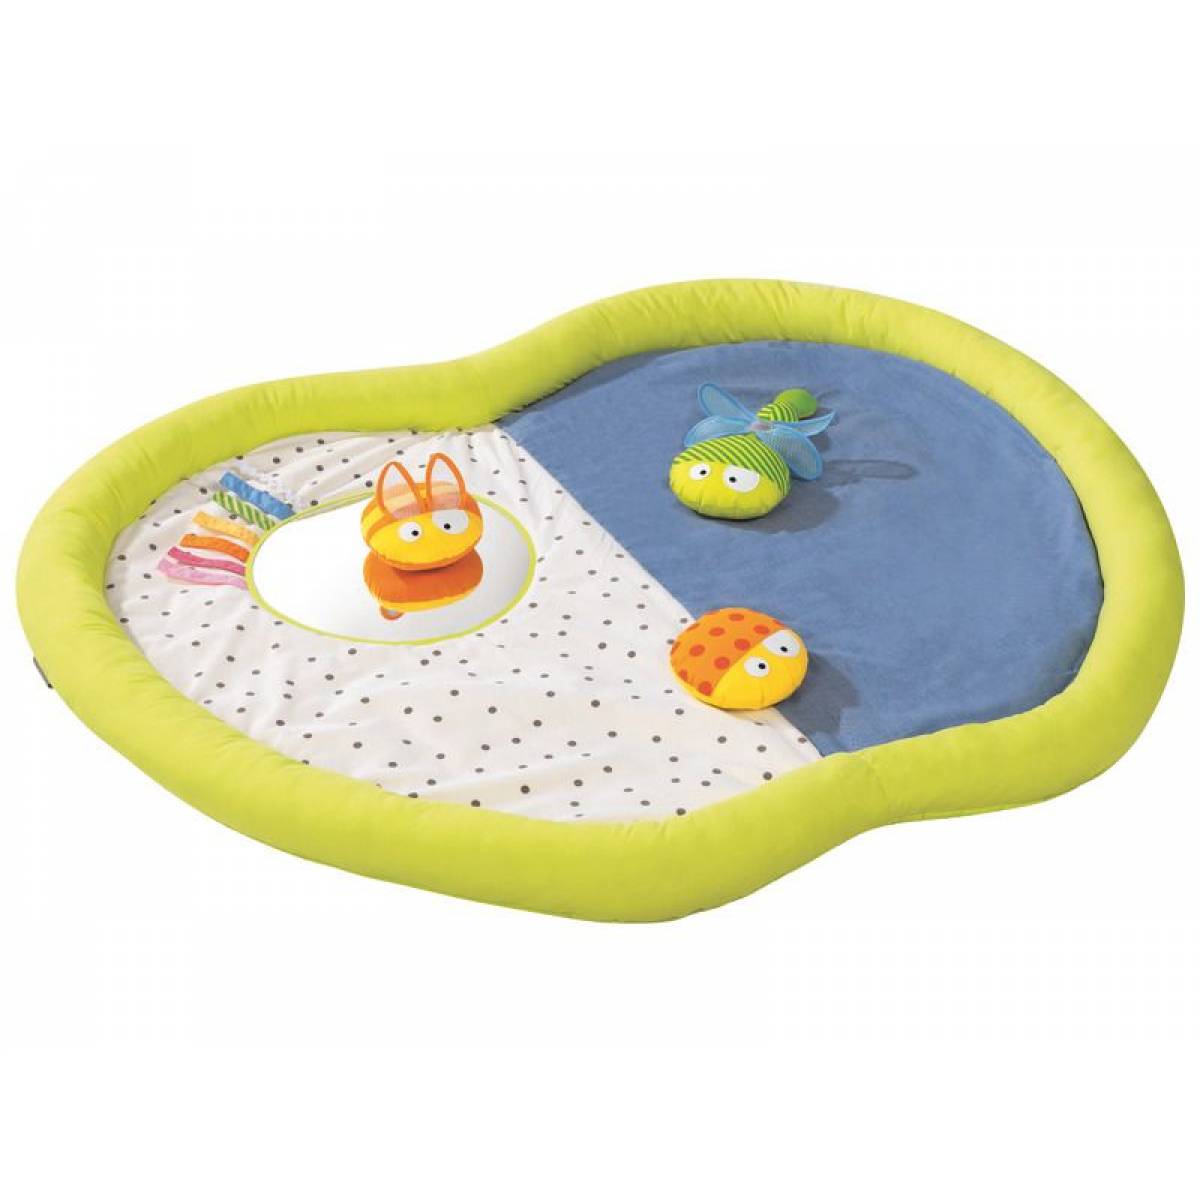 3D Activity Mats - Apple and 3 comforters